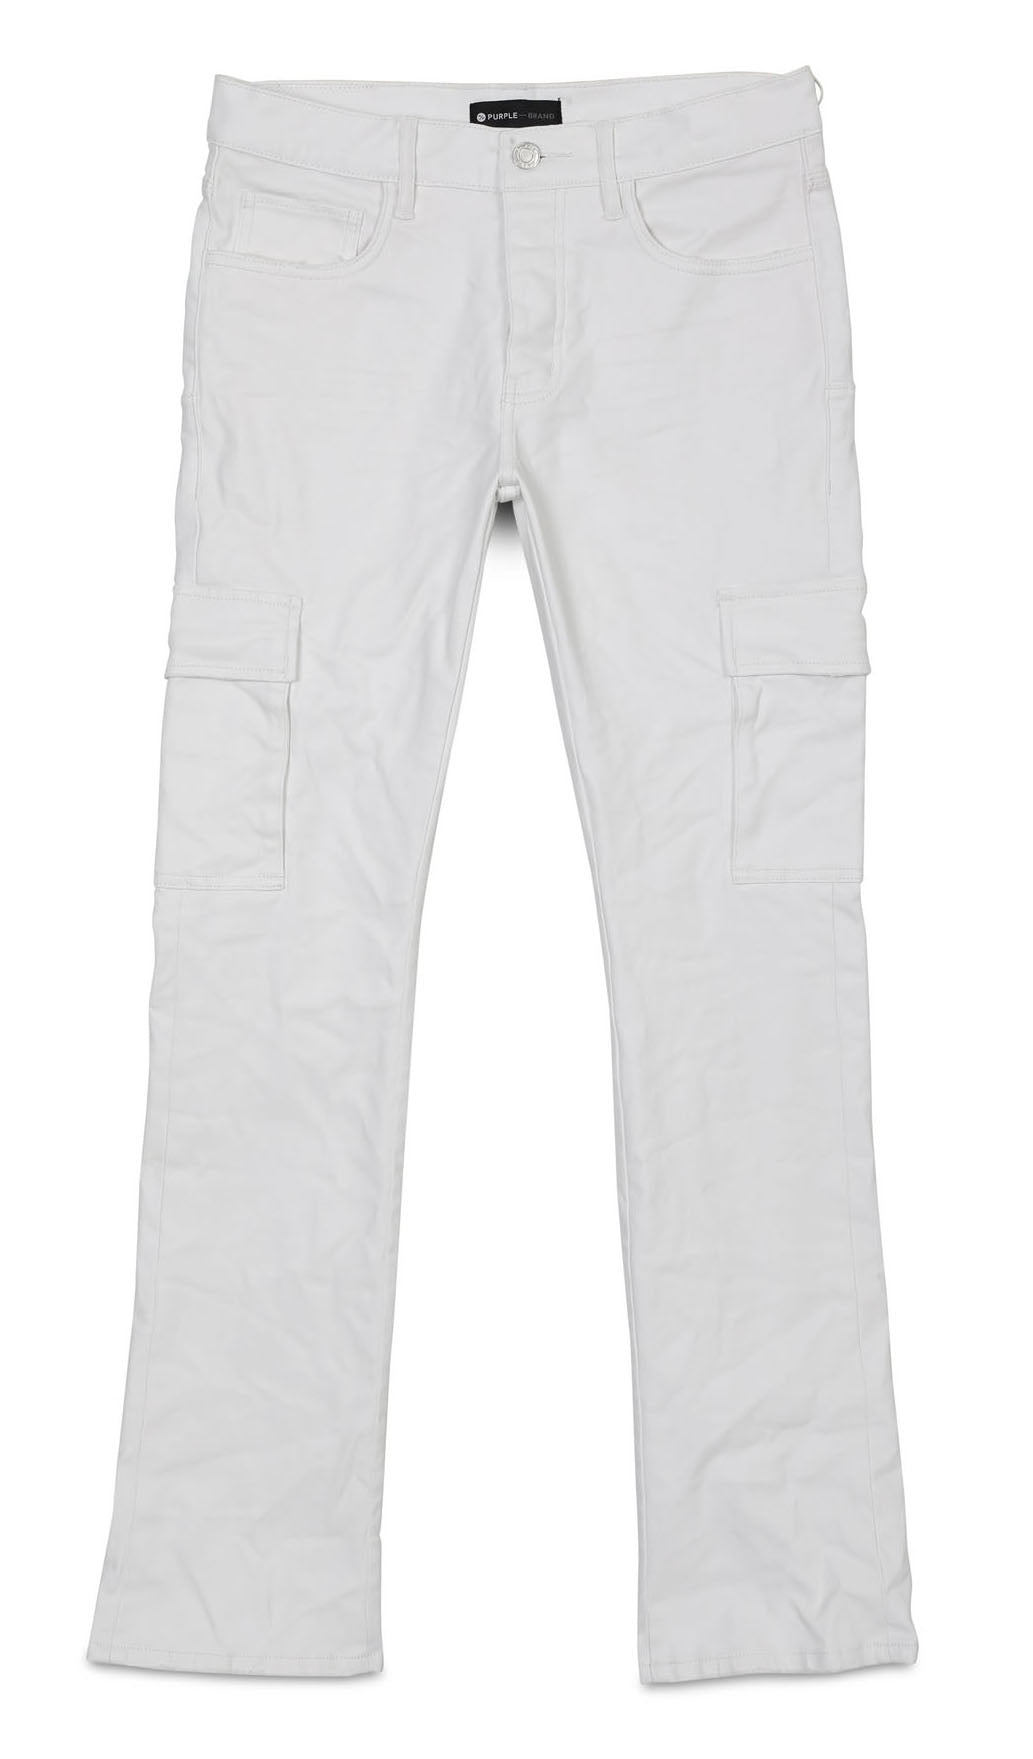 WHITE PATENT LEATHER CARGO PANTS